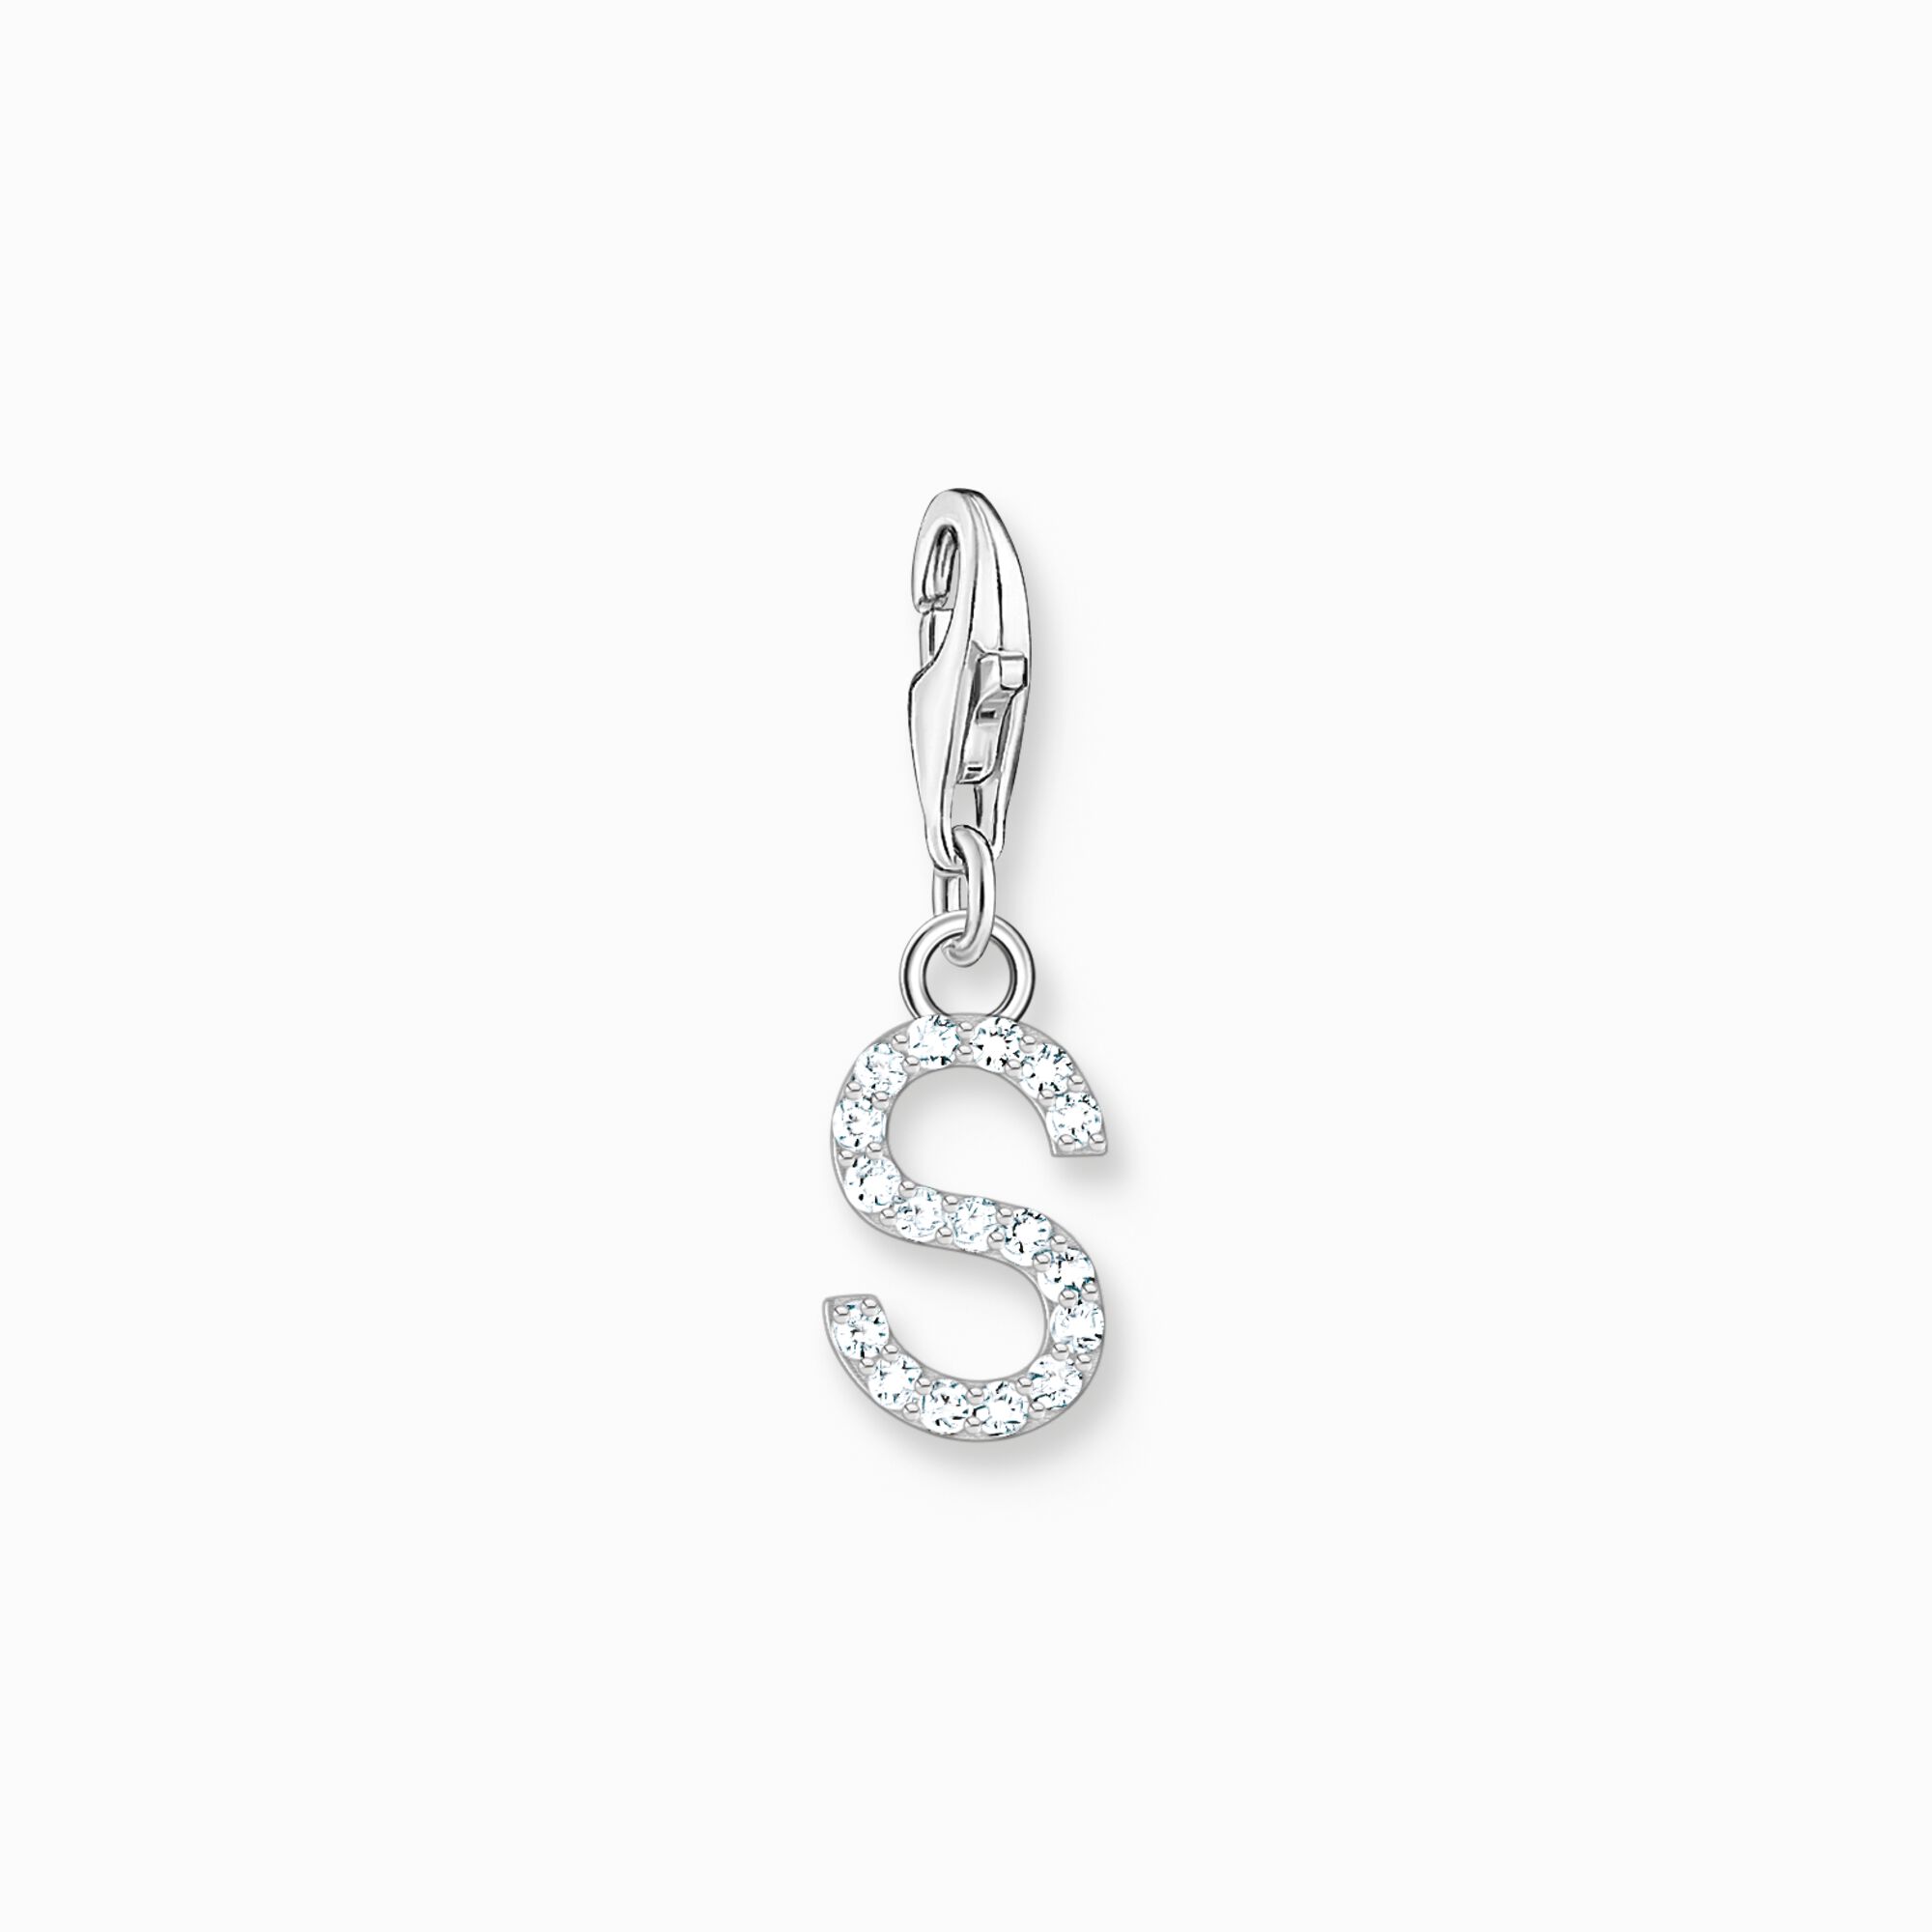 Charm pendant letter S with white stones silver from the Charm Club collection in the THOMAS SABO online store